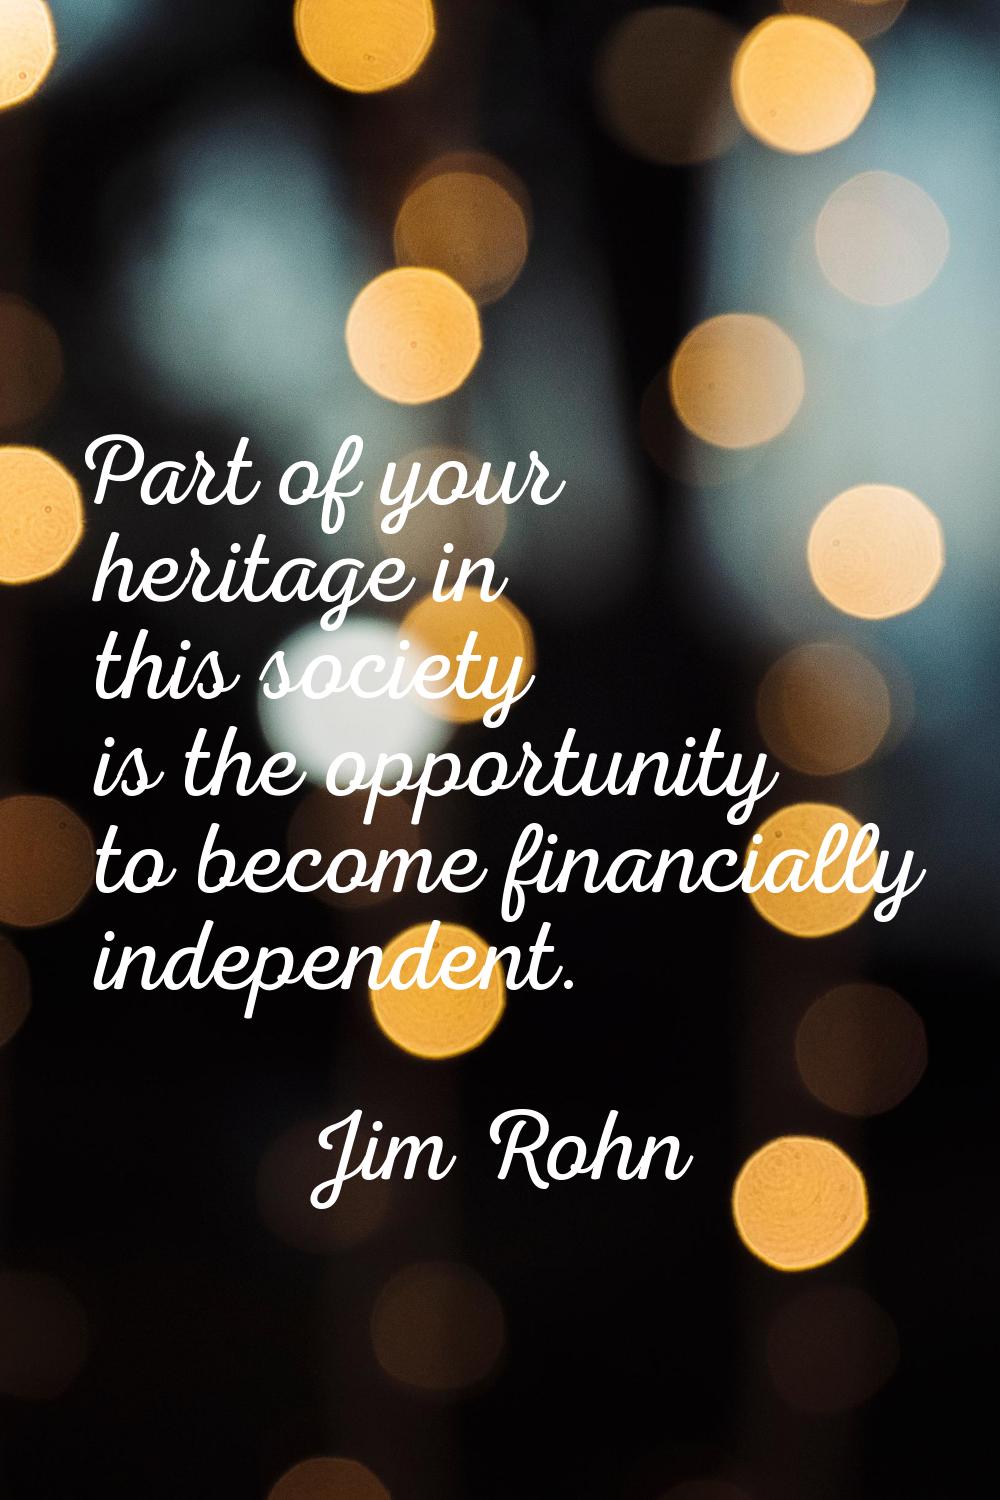 Part of your heritage in this society is the opportunity to become financially independent.